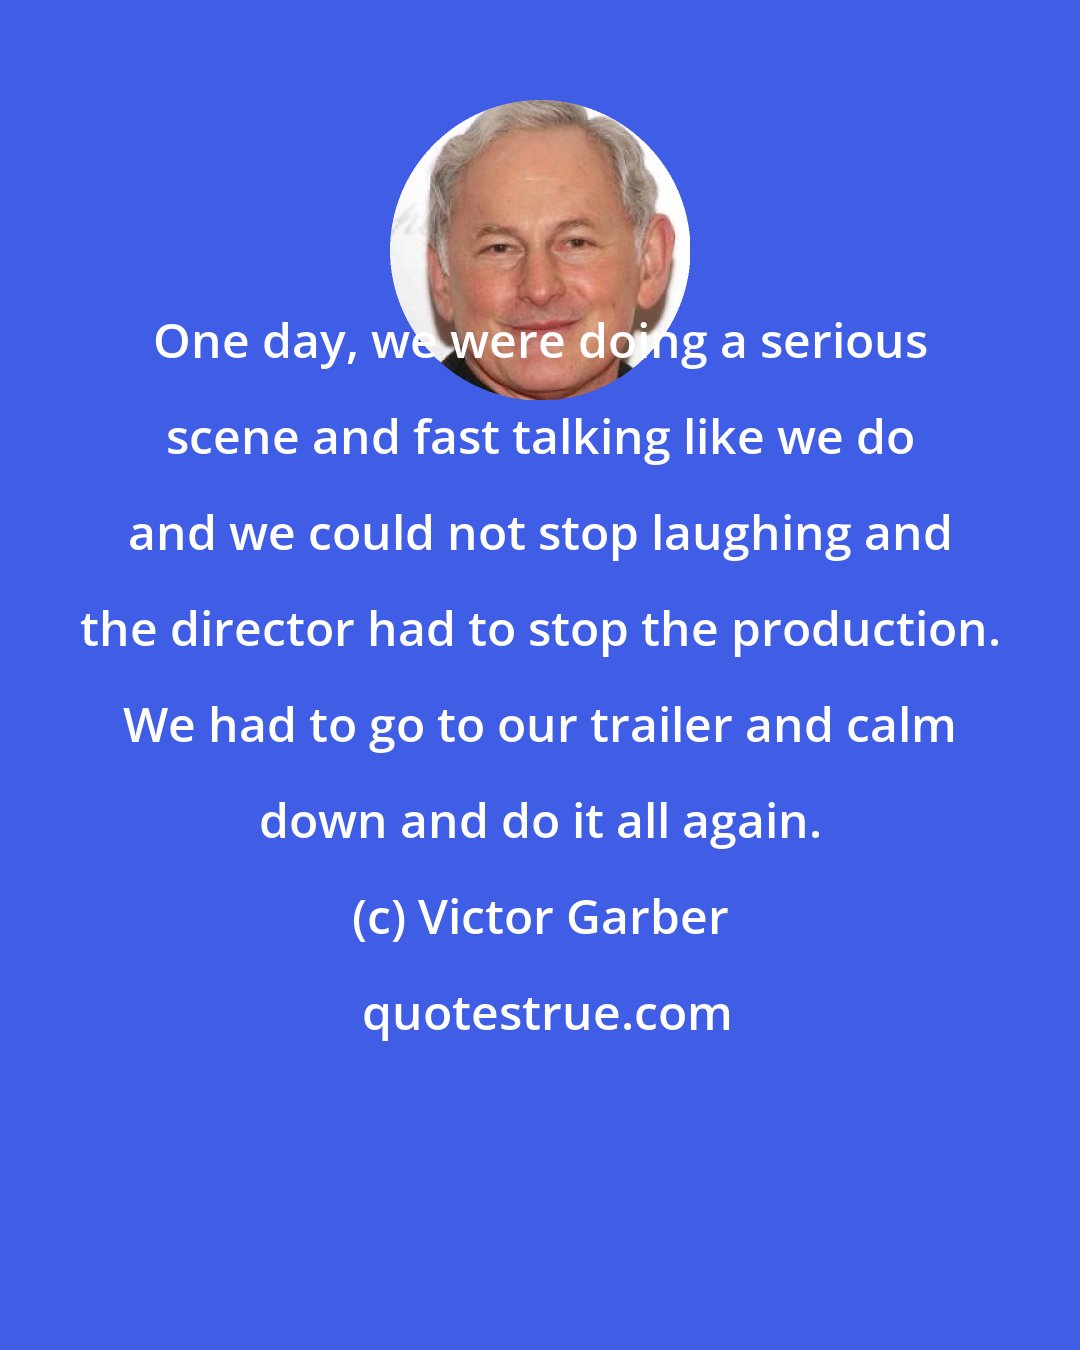 Victor Garber: One day, we were doing a serious scene and fast talking like we do and we could not stop laughing and the director had to stop the production. We had to go to our trailer and calm down and do it all again.